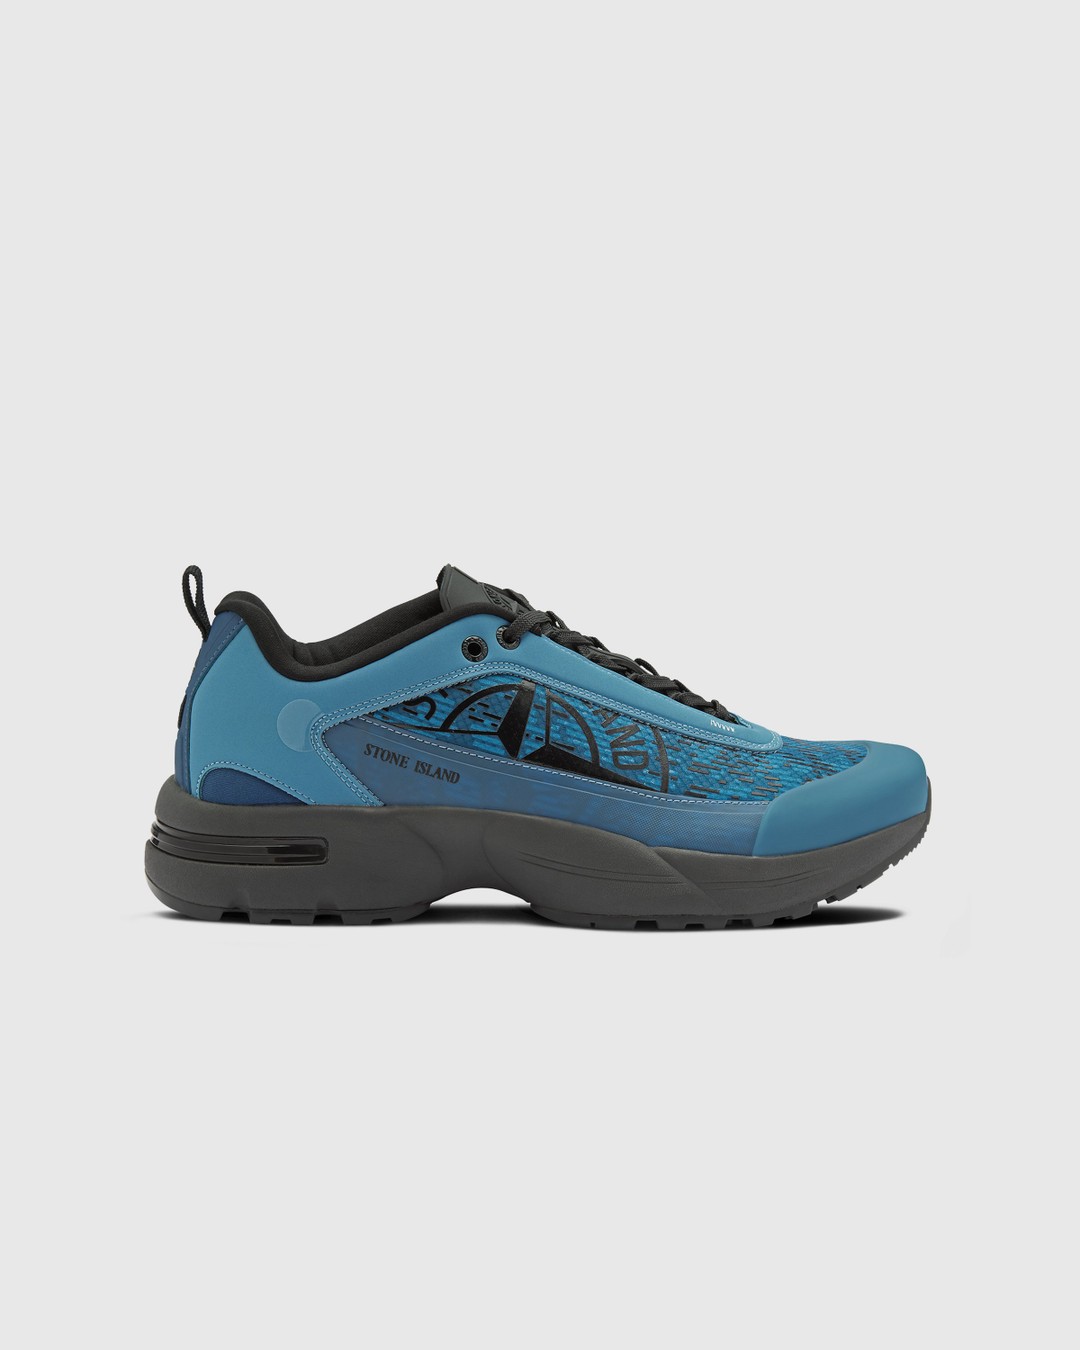 Stone Island – Grime Turquoise 78FWS033 - Sneakers - Blue - Image 1